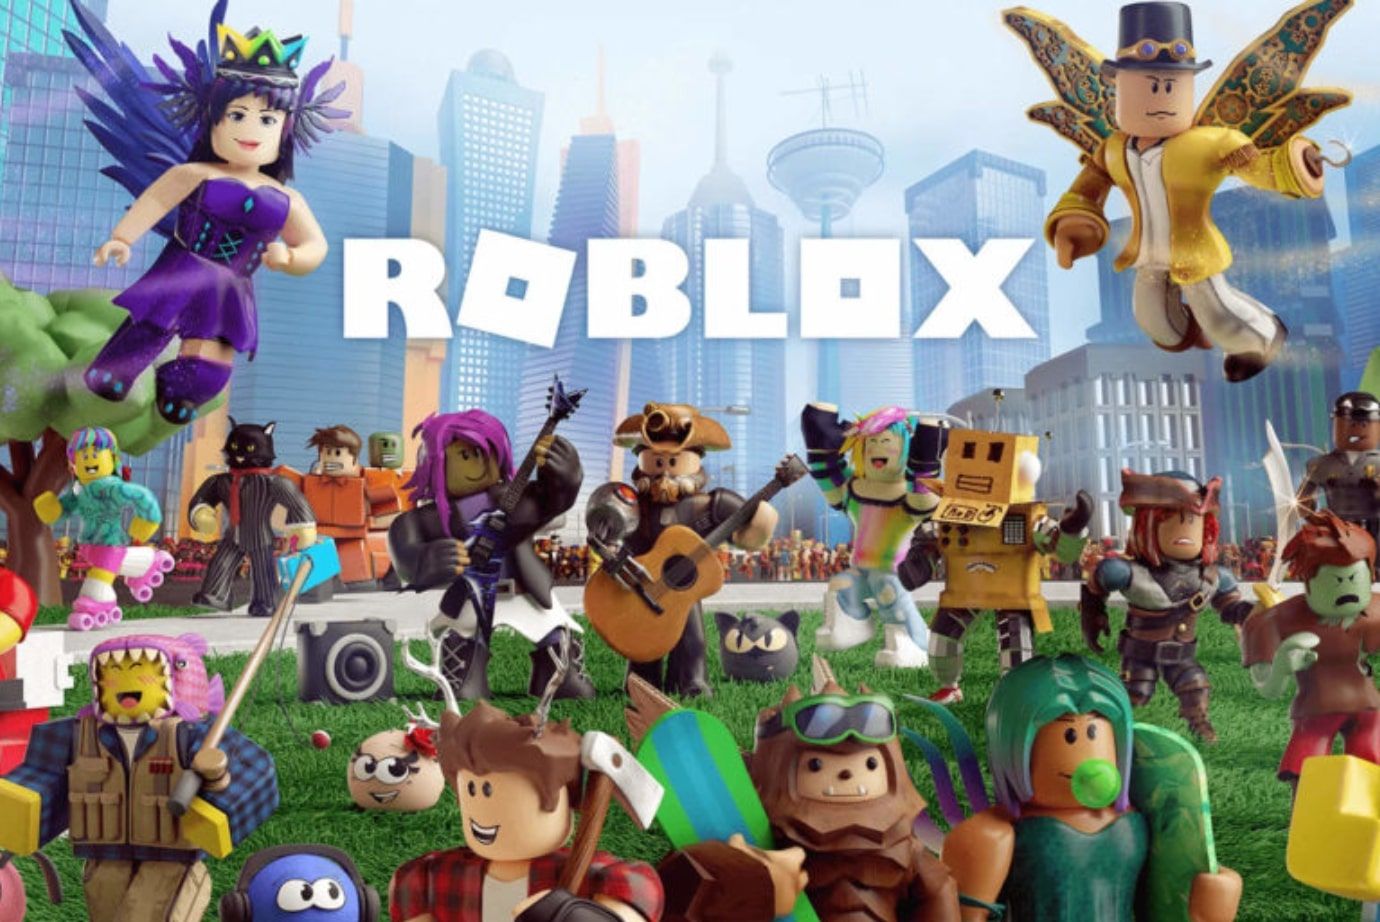 Roblox September 2020 Promo Codes New Cosmetics All Active Codes Backpacks Crystalline Companion More - roblox all promo codes september 2020